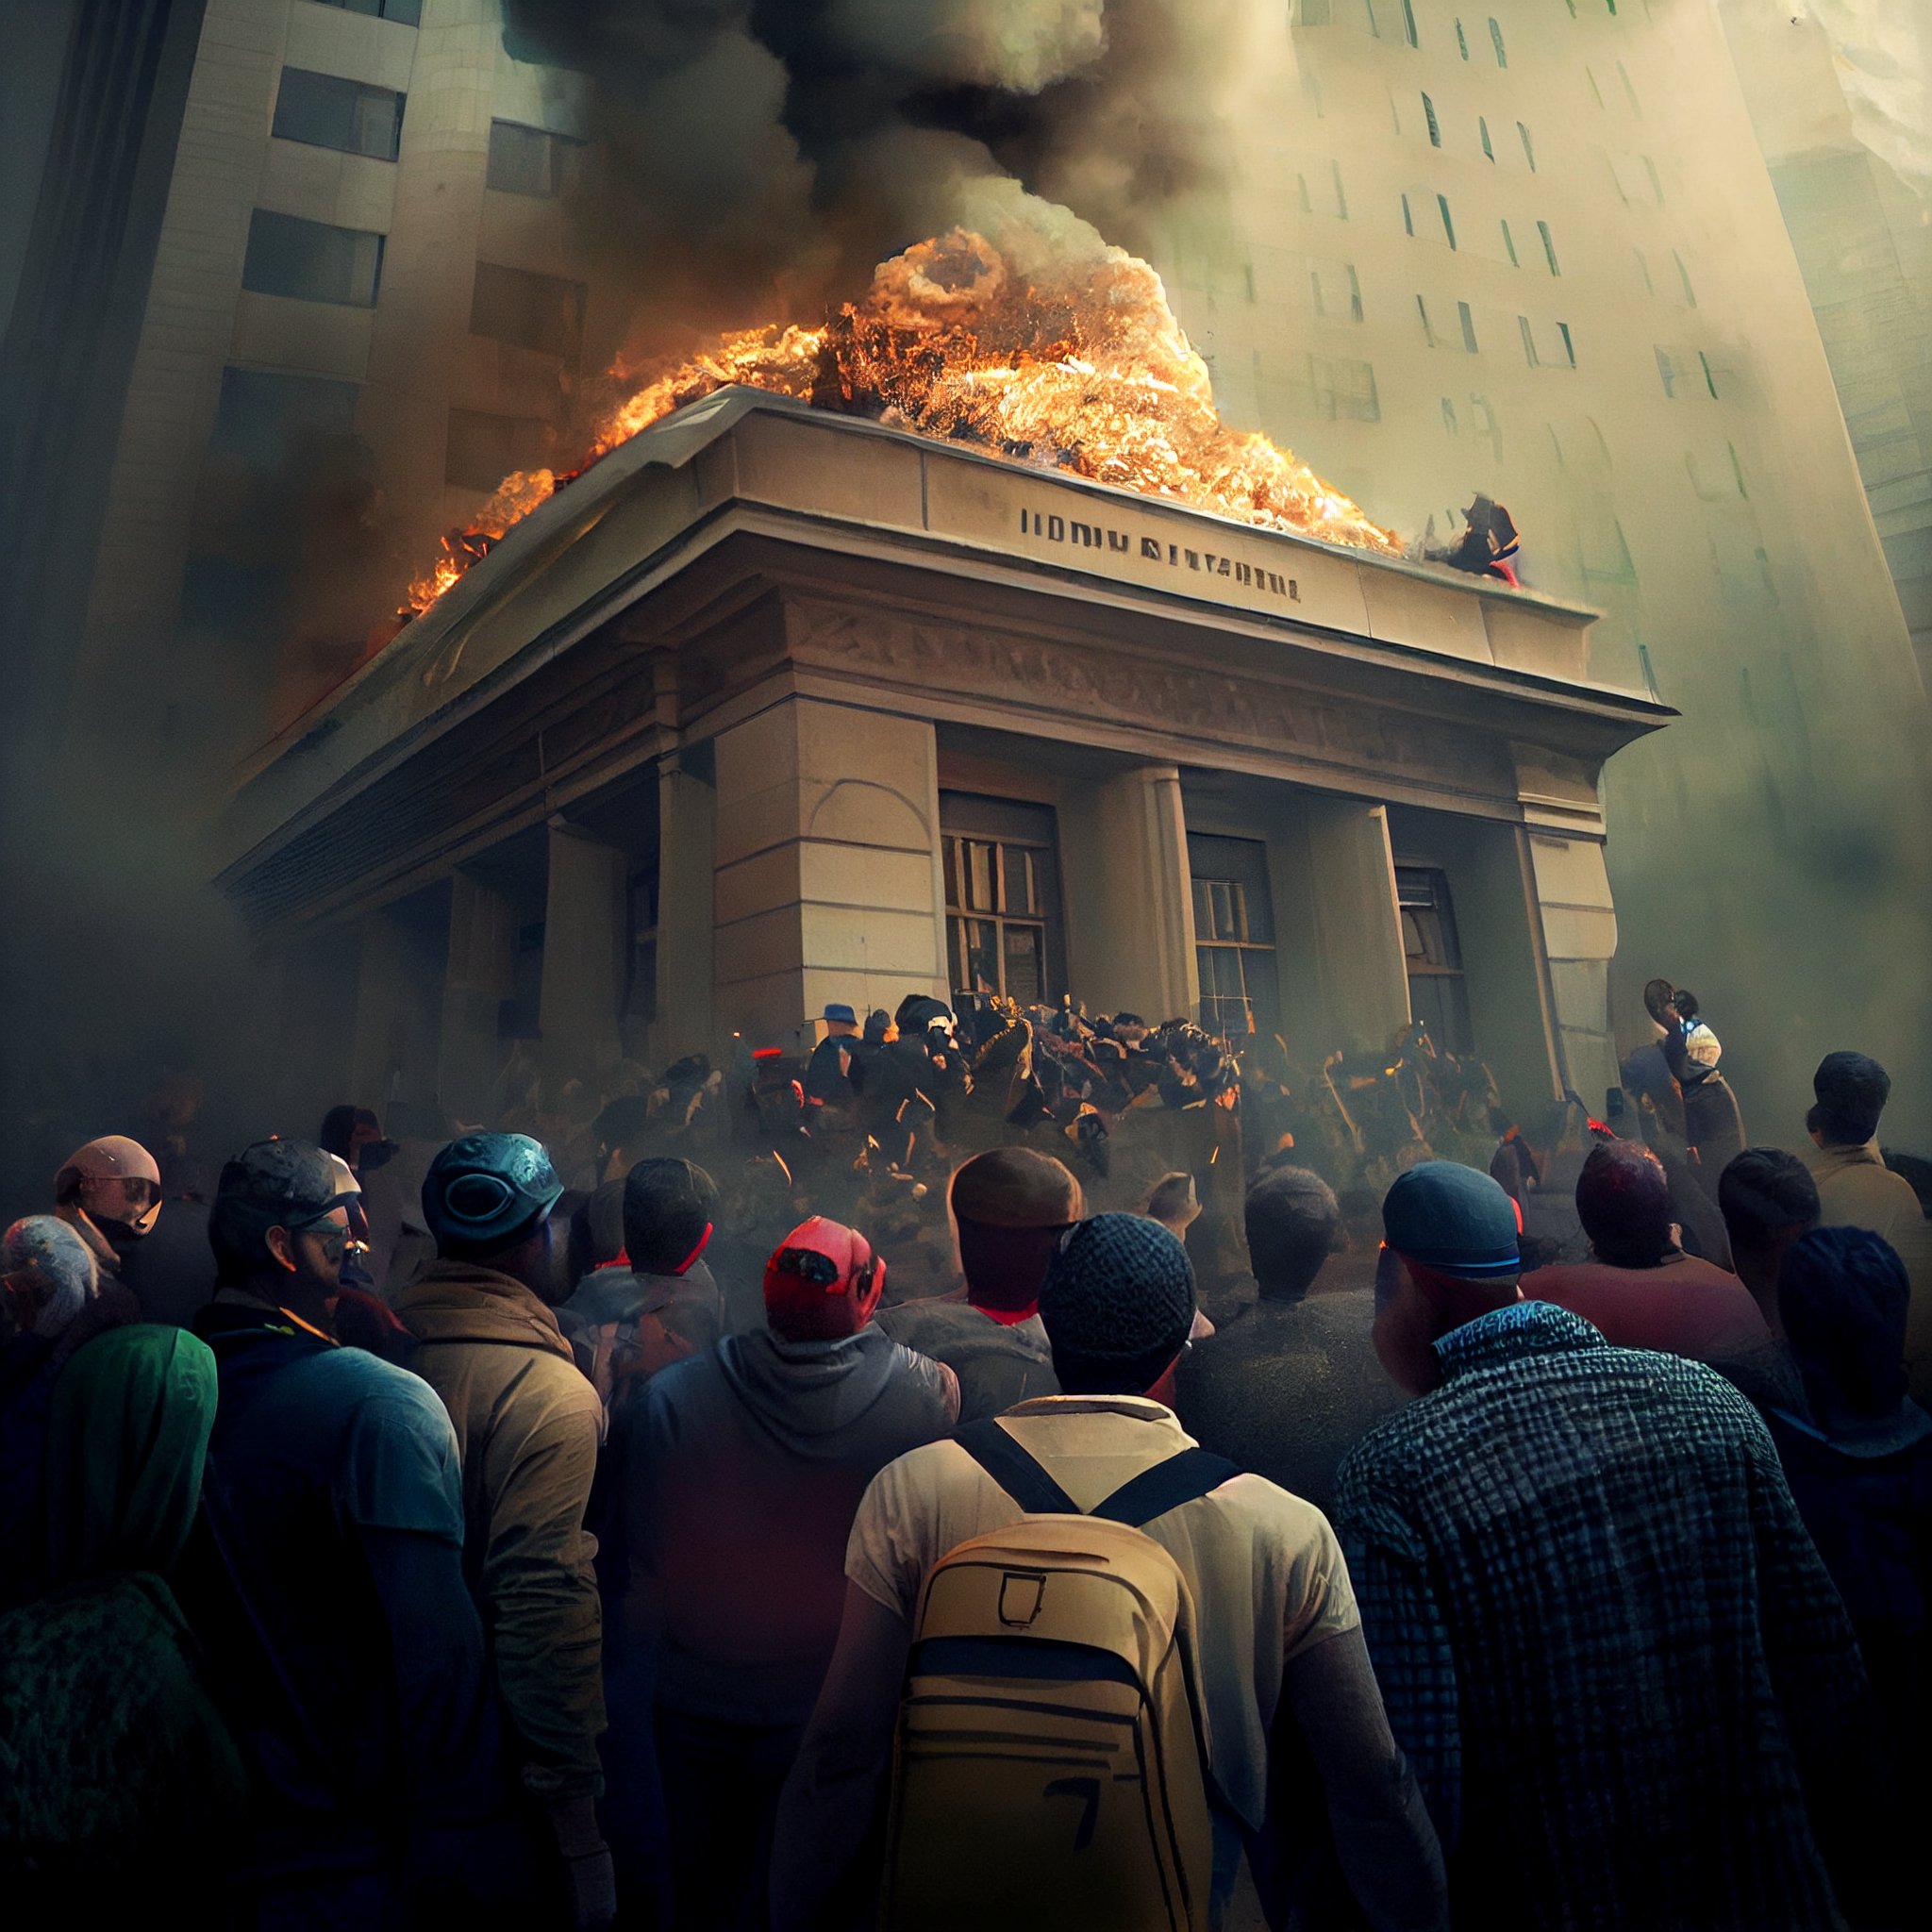 Beggars_An_angry_crowd_gathers_around_a_large_bank_as_they_burn_4f7d31c6fa99417b8af9194913e95e04.png